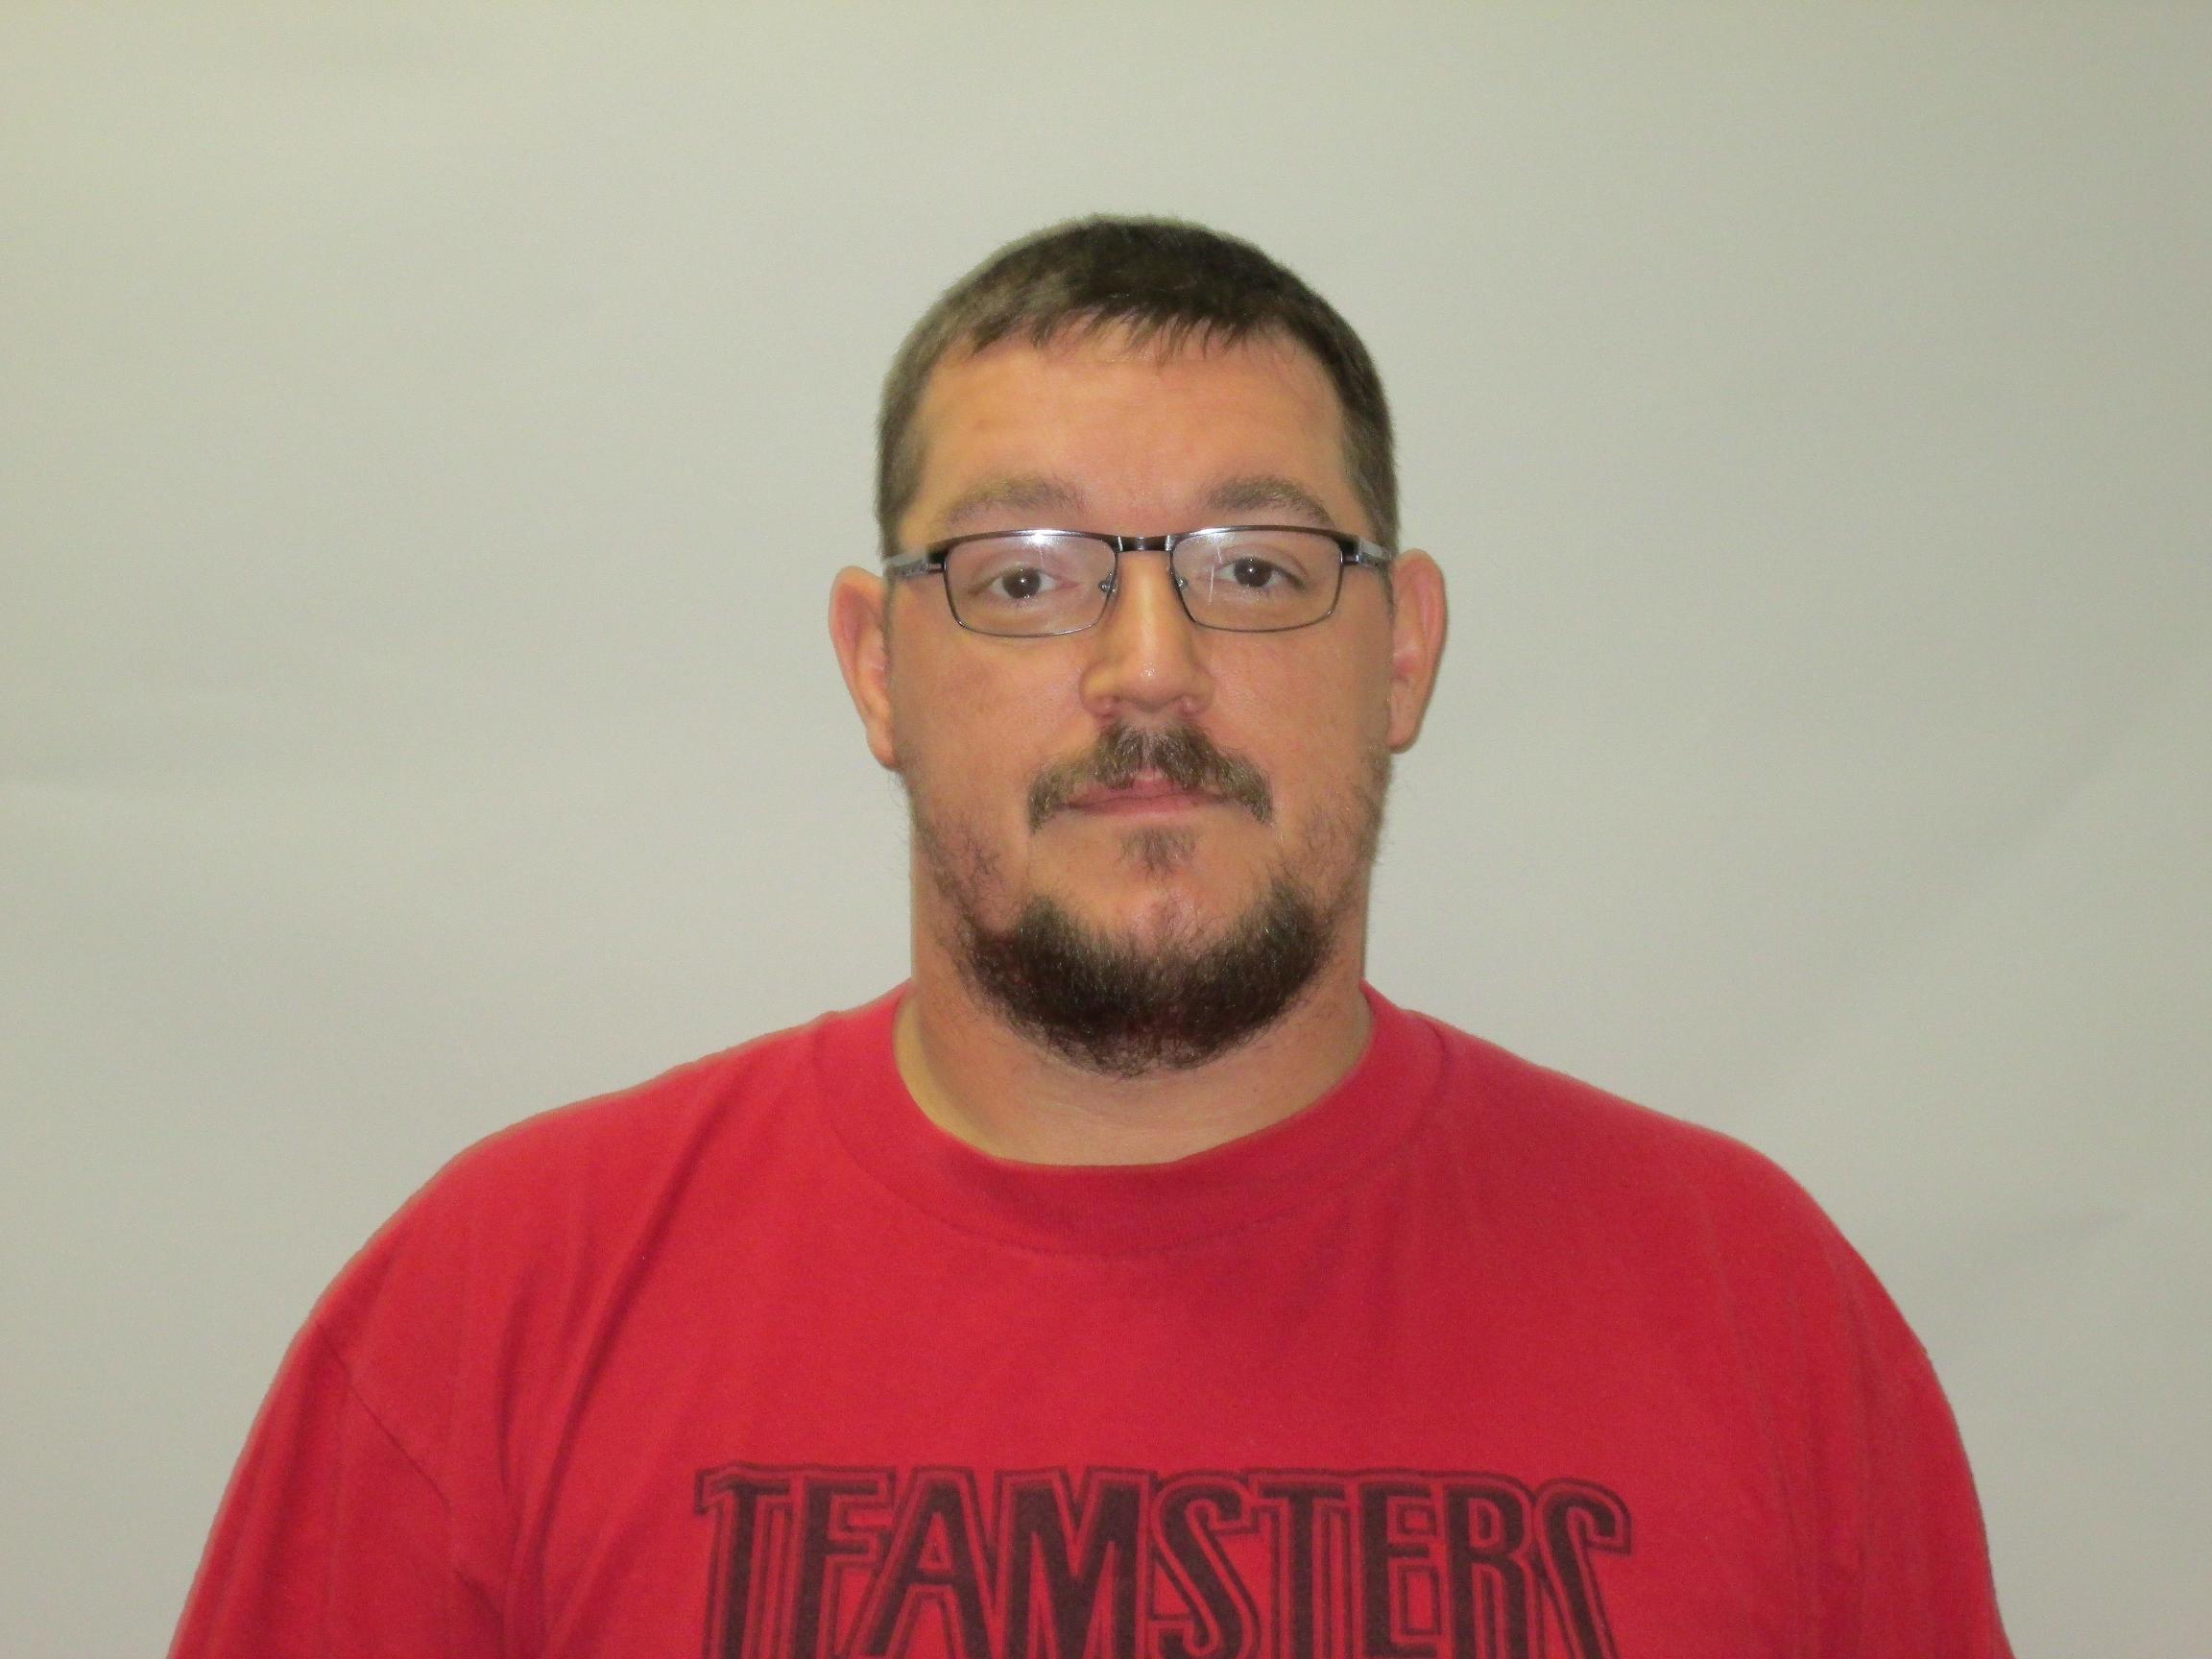 offender-information-kentucky-department-of-corrections-offender